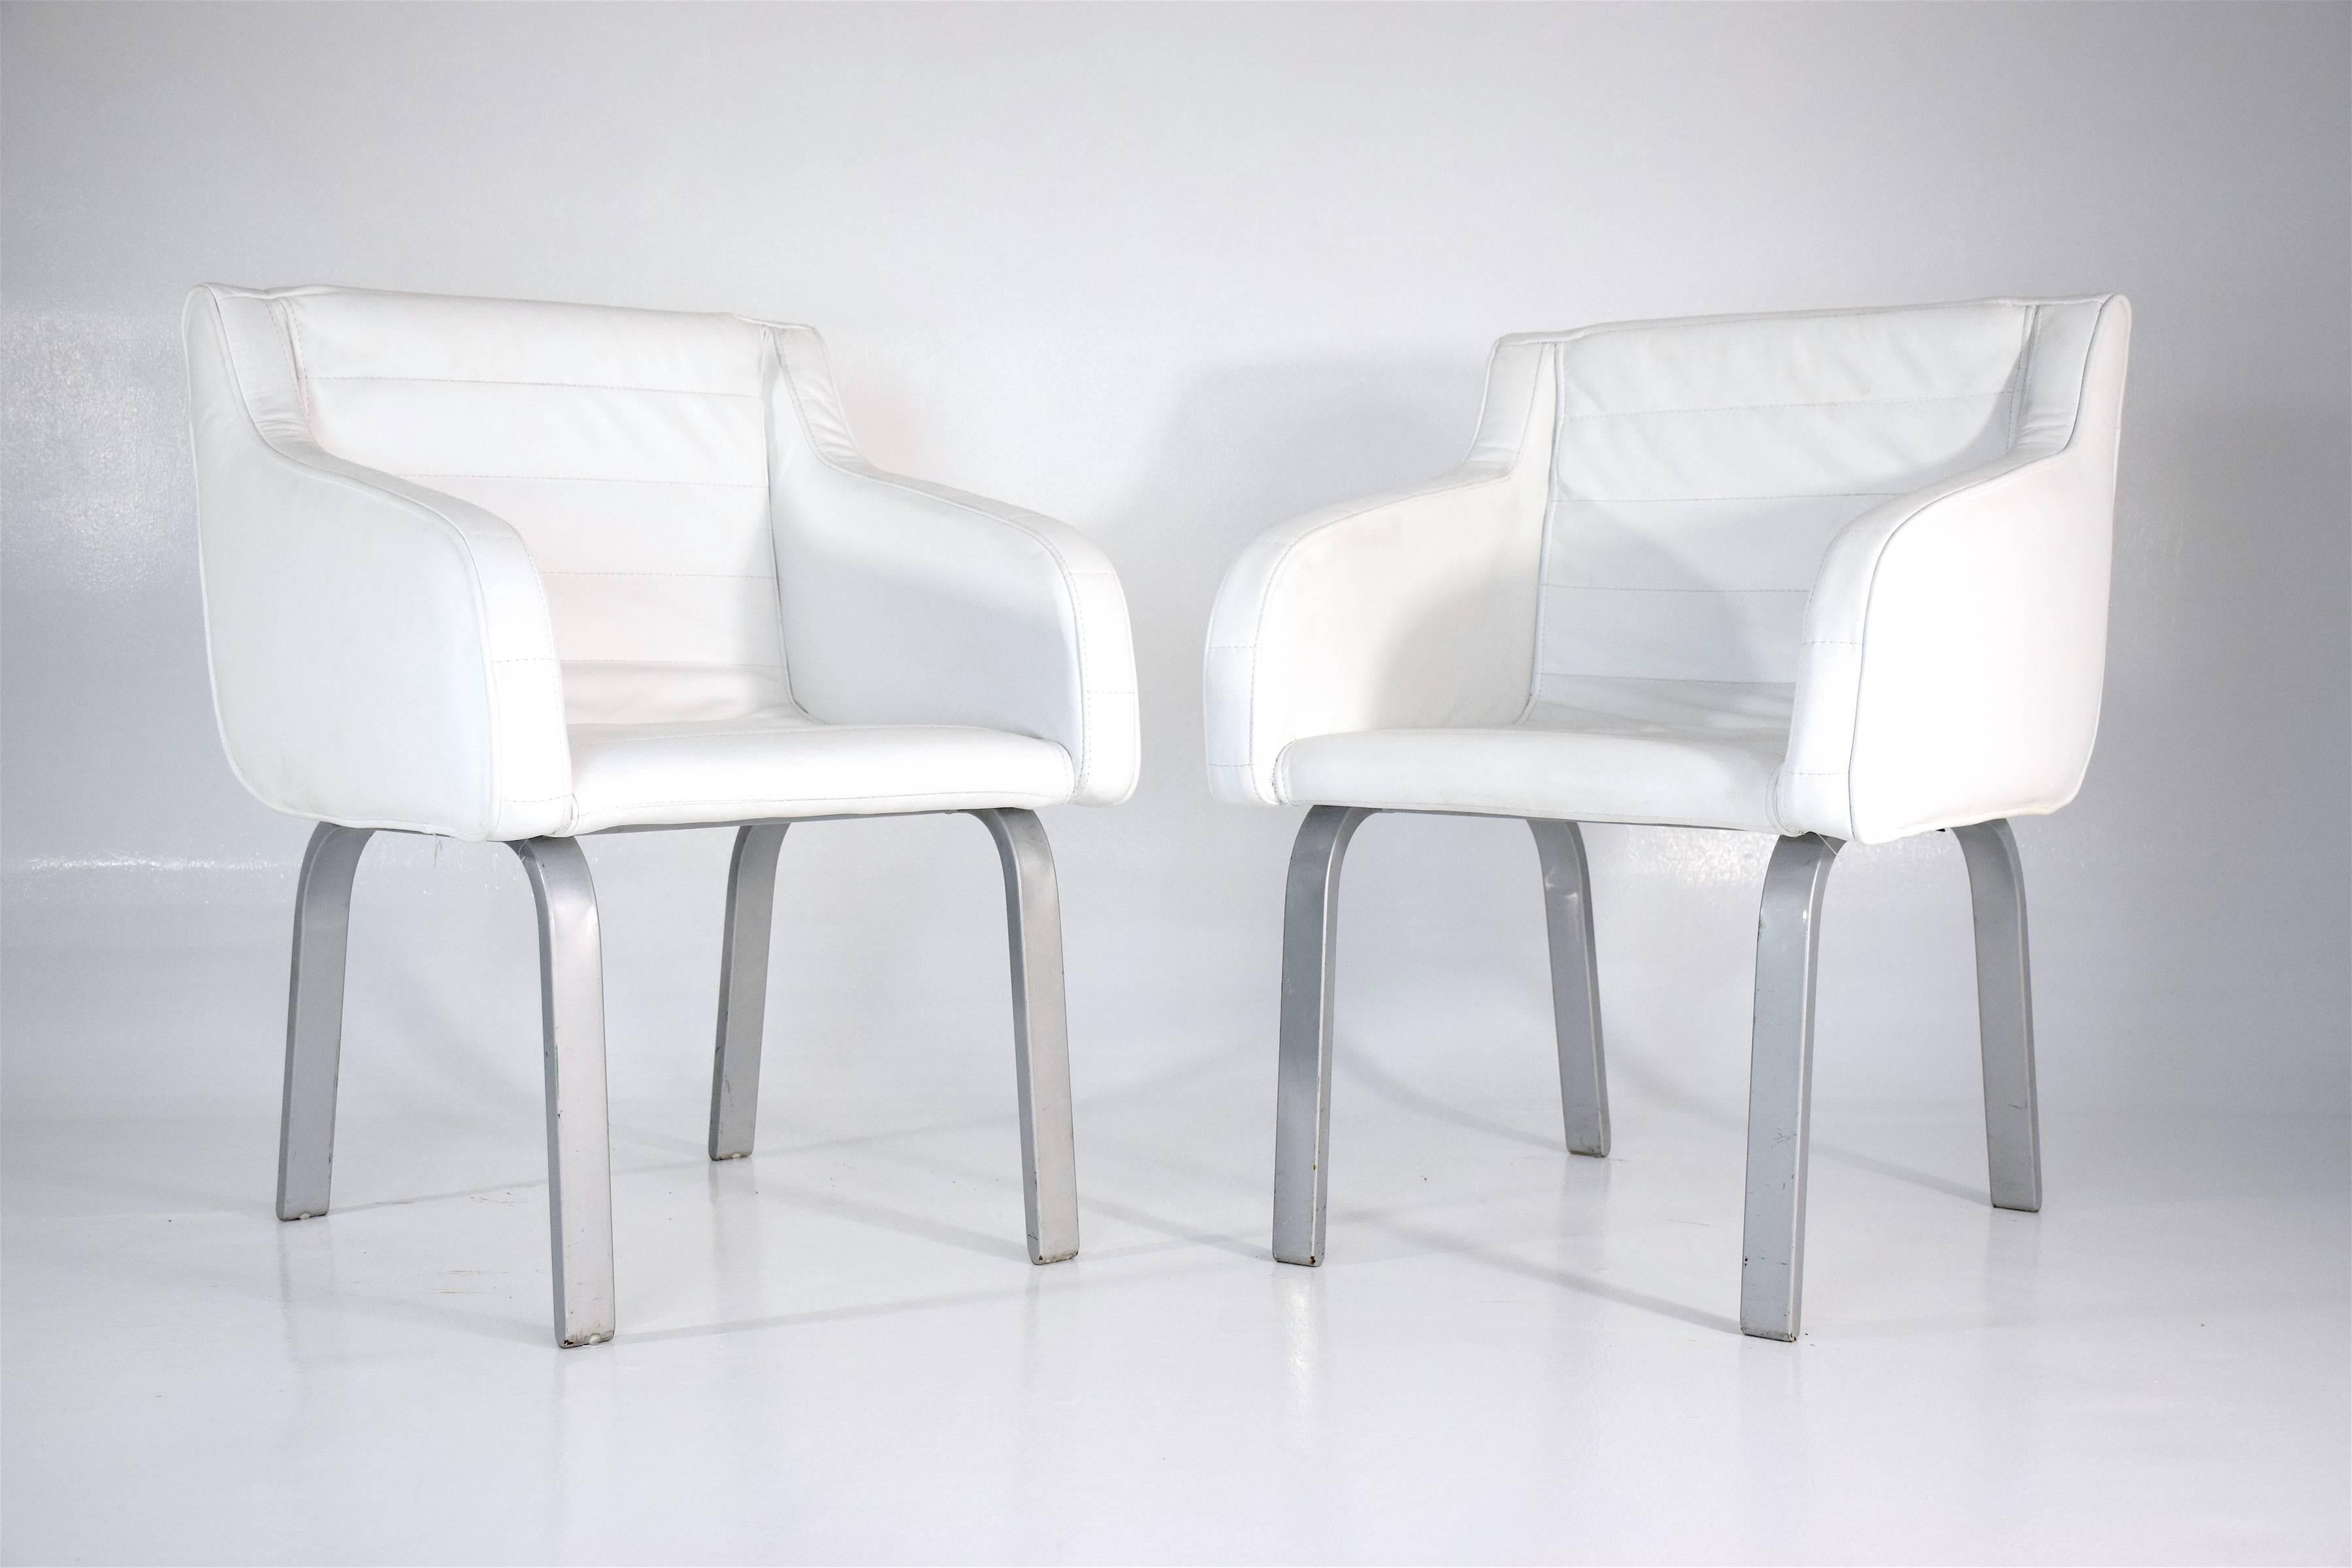 20th-century vintage pair of armchairs designed by French architect Christian Biecher for an elite Parisian restaurant named le Korova in 1999. These were edited by Italian notable furniture maker Poltrona Frau.

These chairs have recently been